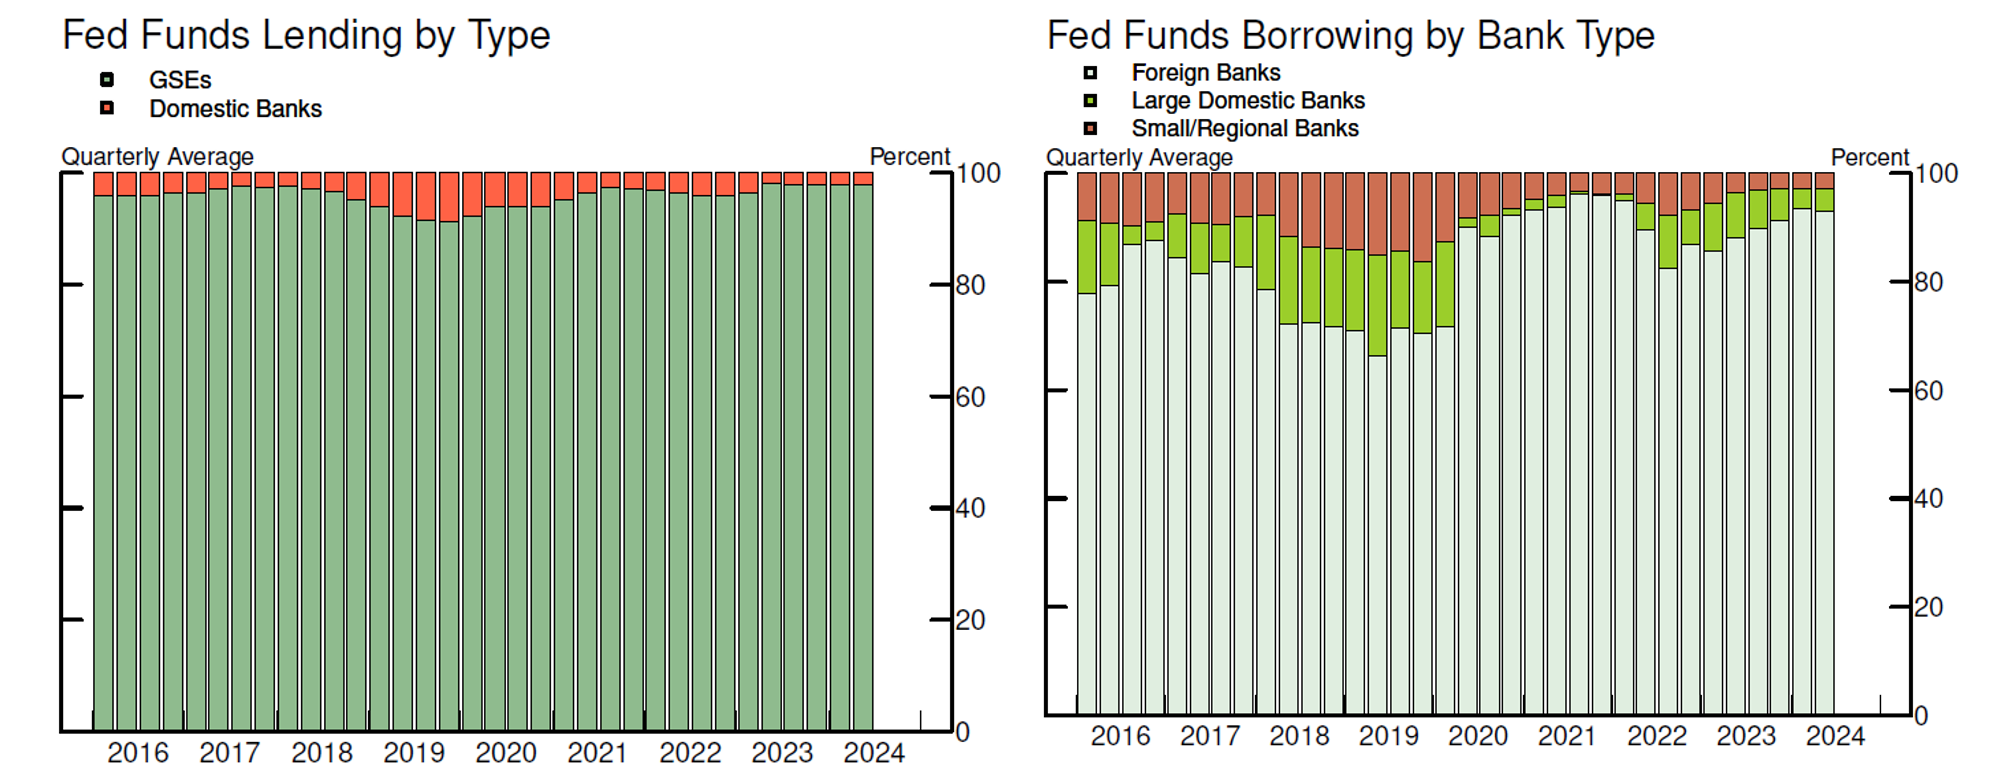 Figure 3. Fed Funds Market Share by Type. See accessible link for data.